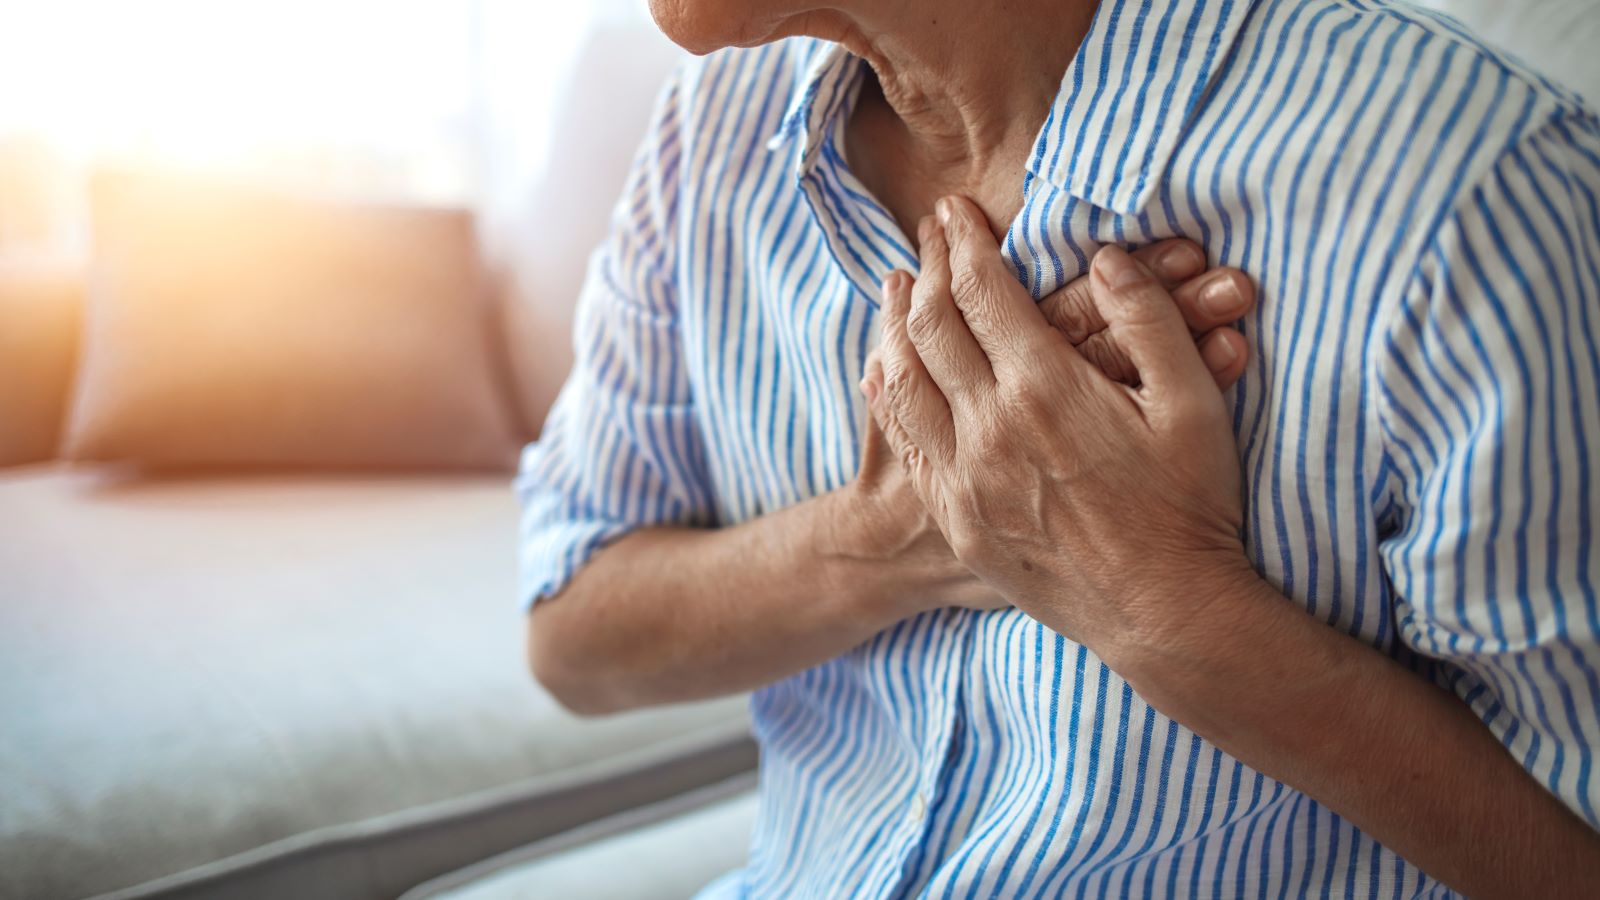 10 "Silent" Signs of a Heart Attack That You Should Know